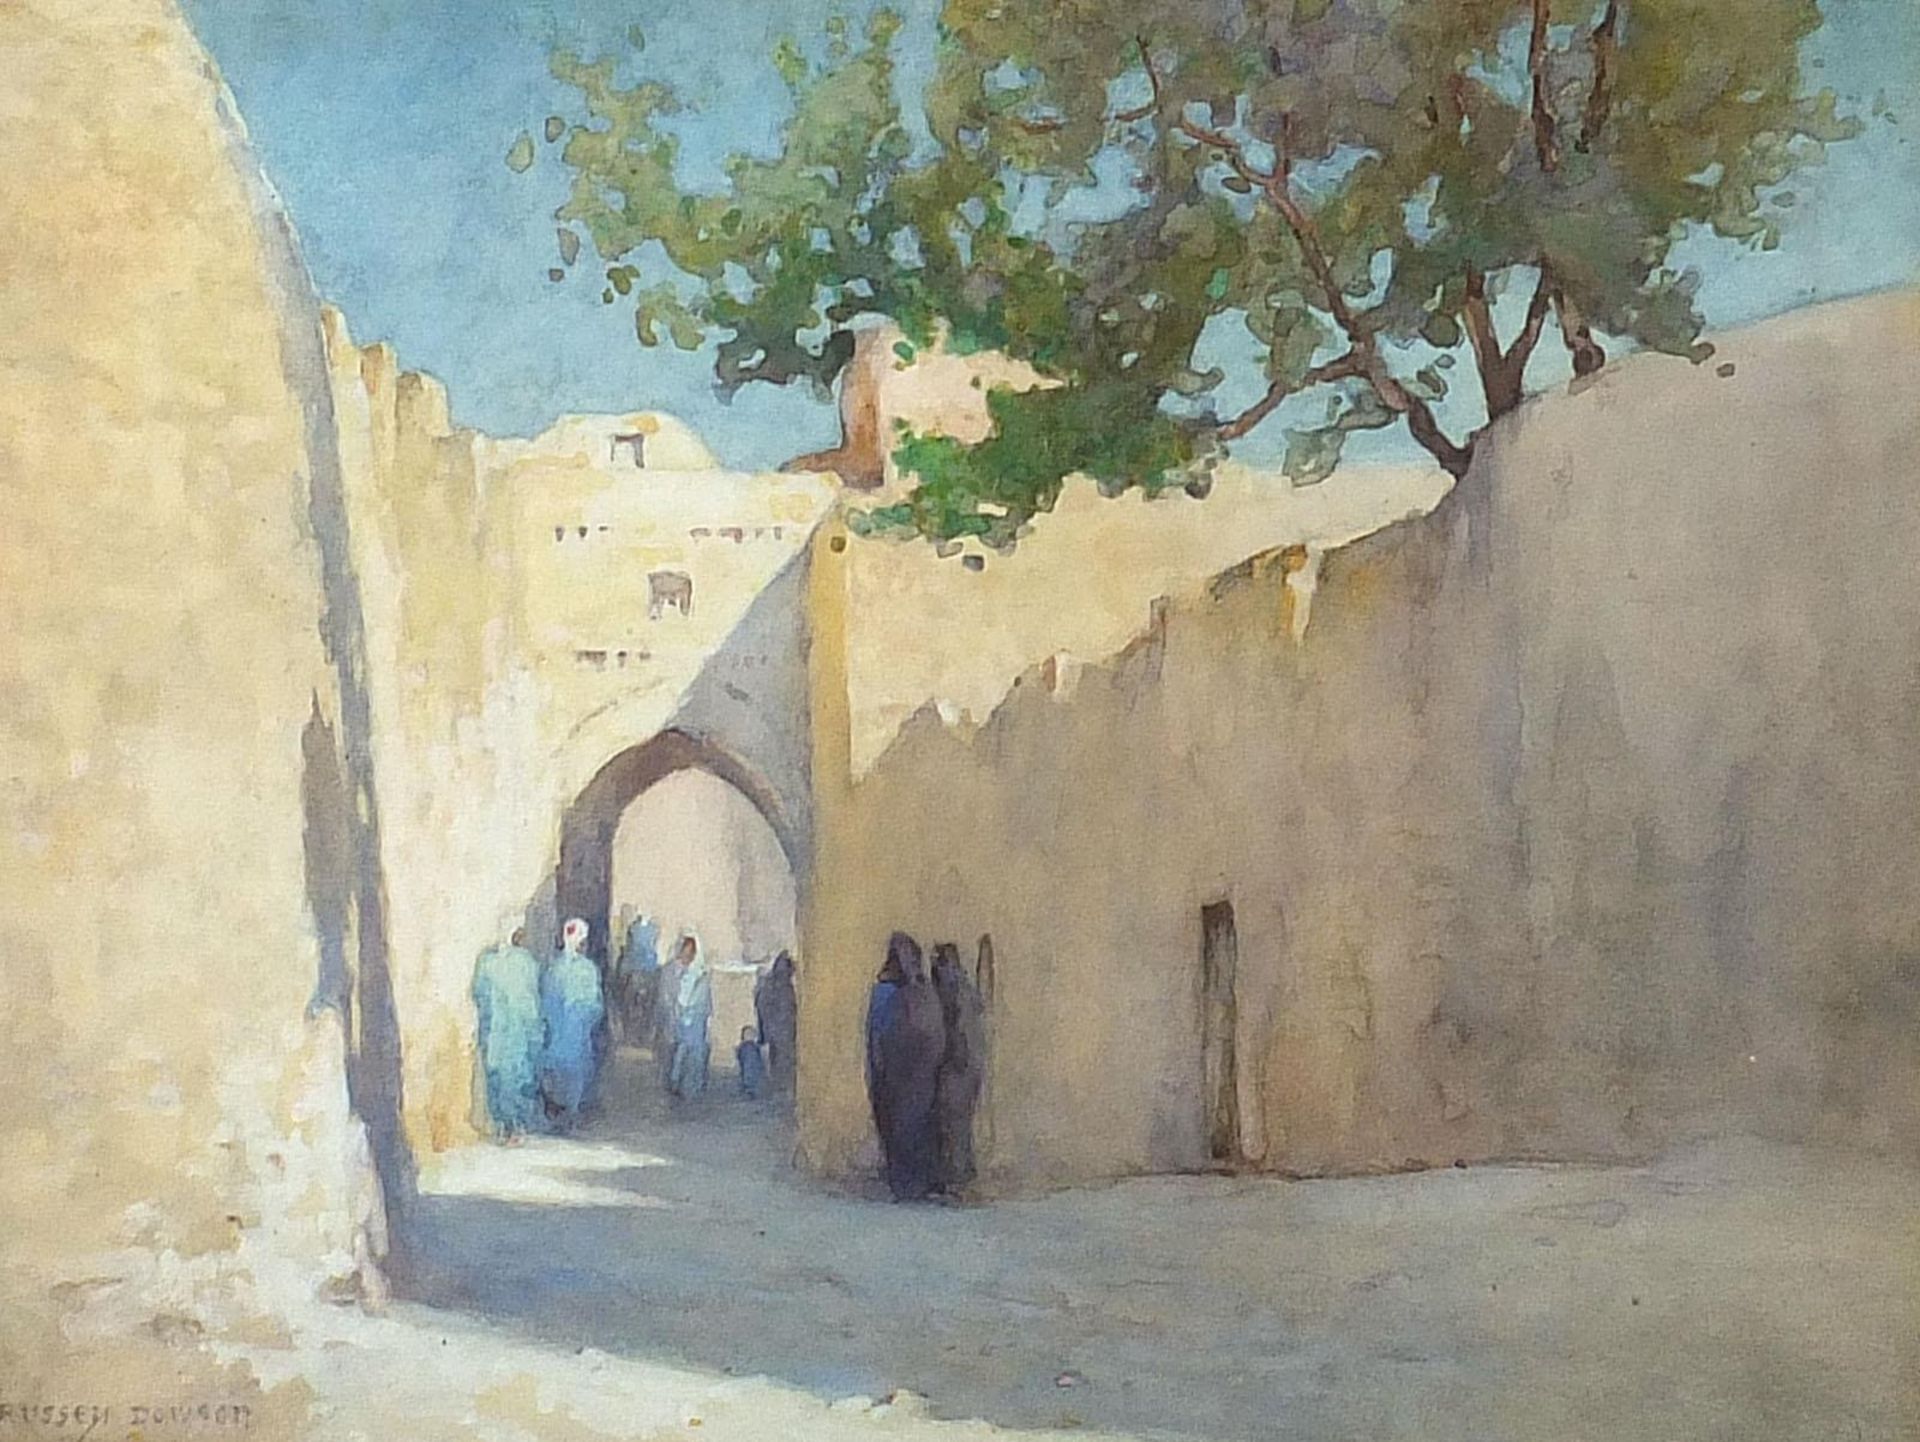 Russell Dowson - Middle Eastern street scene with figures, watercolour, mounted, framed and